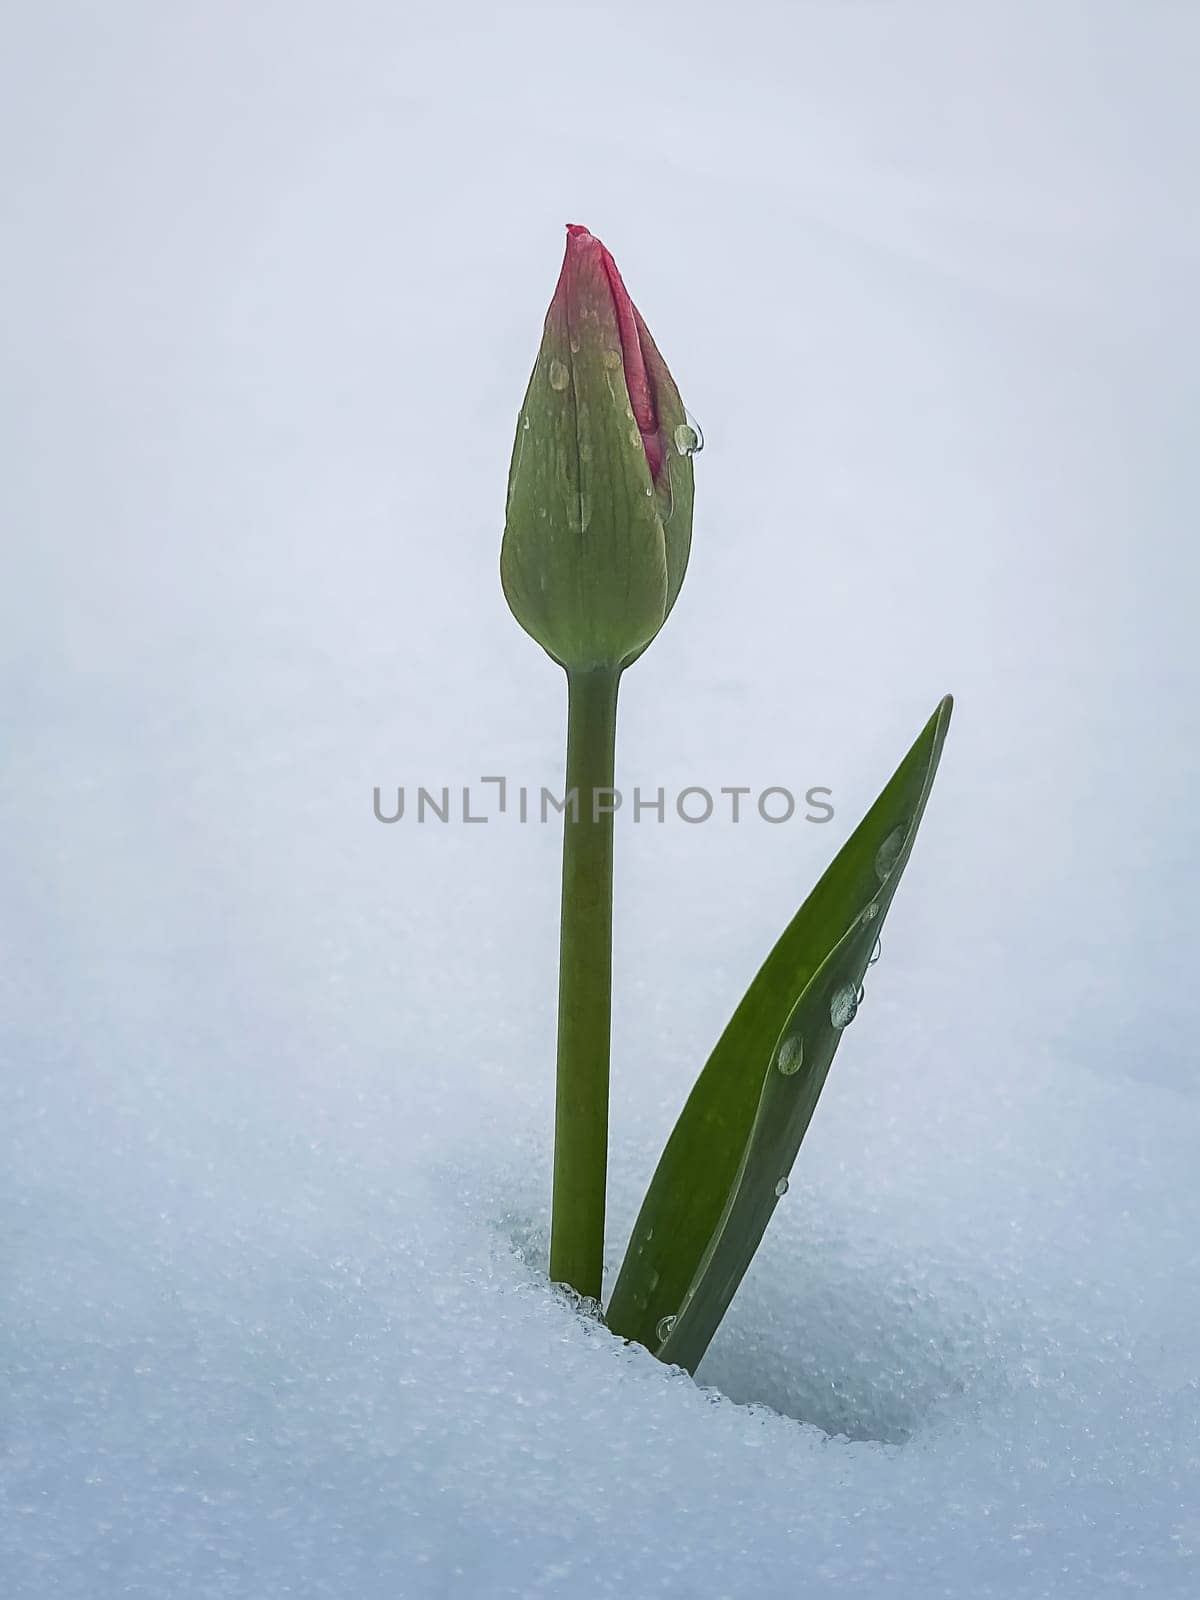 Unbloomed young tulip flower growing under the white snow. Water drops on the bud and leaves by psychoshadow